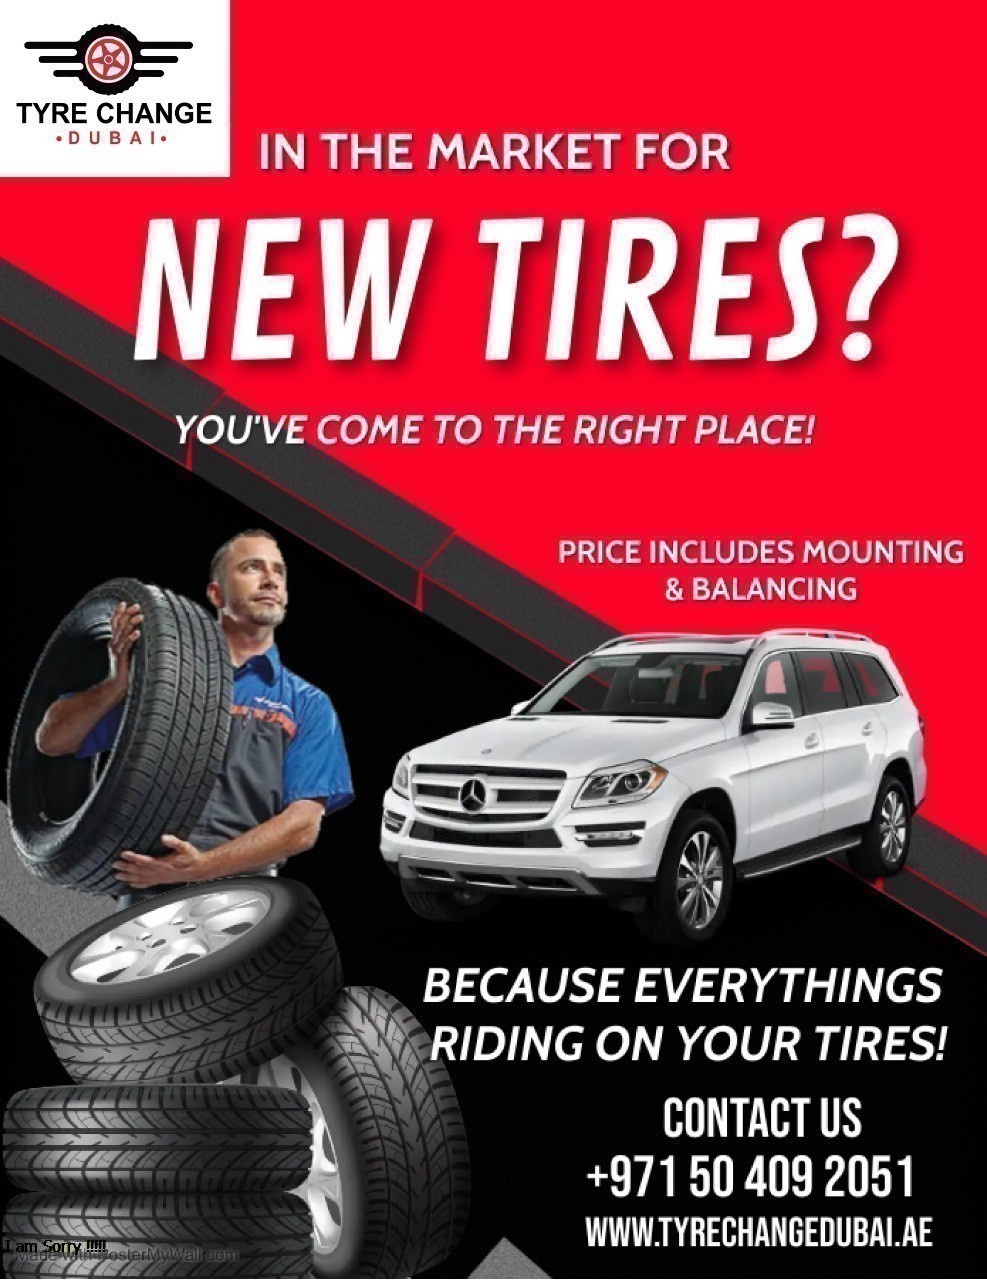 TYRE CHANGE

a |N THE MARKET FOR

NEW TIRES?

YOU'VE COME TO THE RIGHT PLACE!

 

PRICE INCLUDES MOUNTING
nw LE FTV el[Yd

 

4 g . § - bY a Q ;
F 4 BECAUSE EVERYTHINGS

\

= A, RIDING ON YOUR TIRES!
ass S ETAT
wo +7150 409 2051
as [GTI